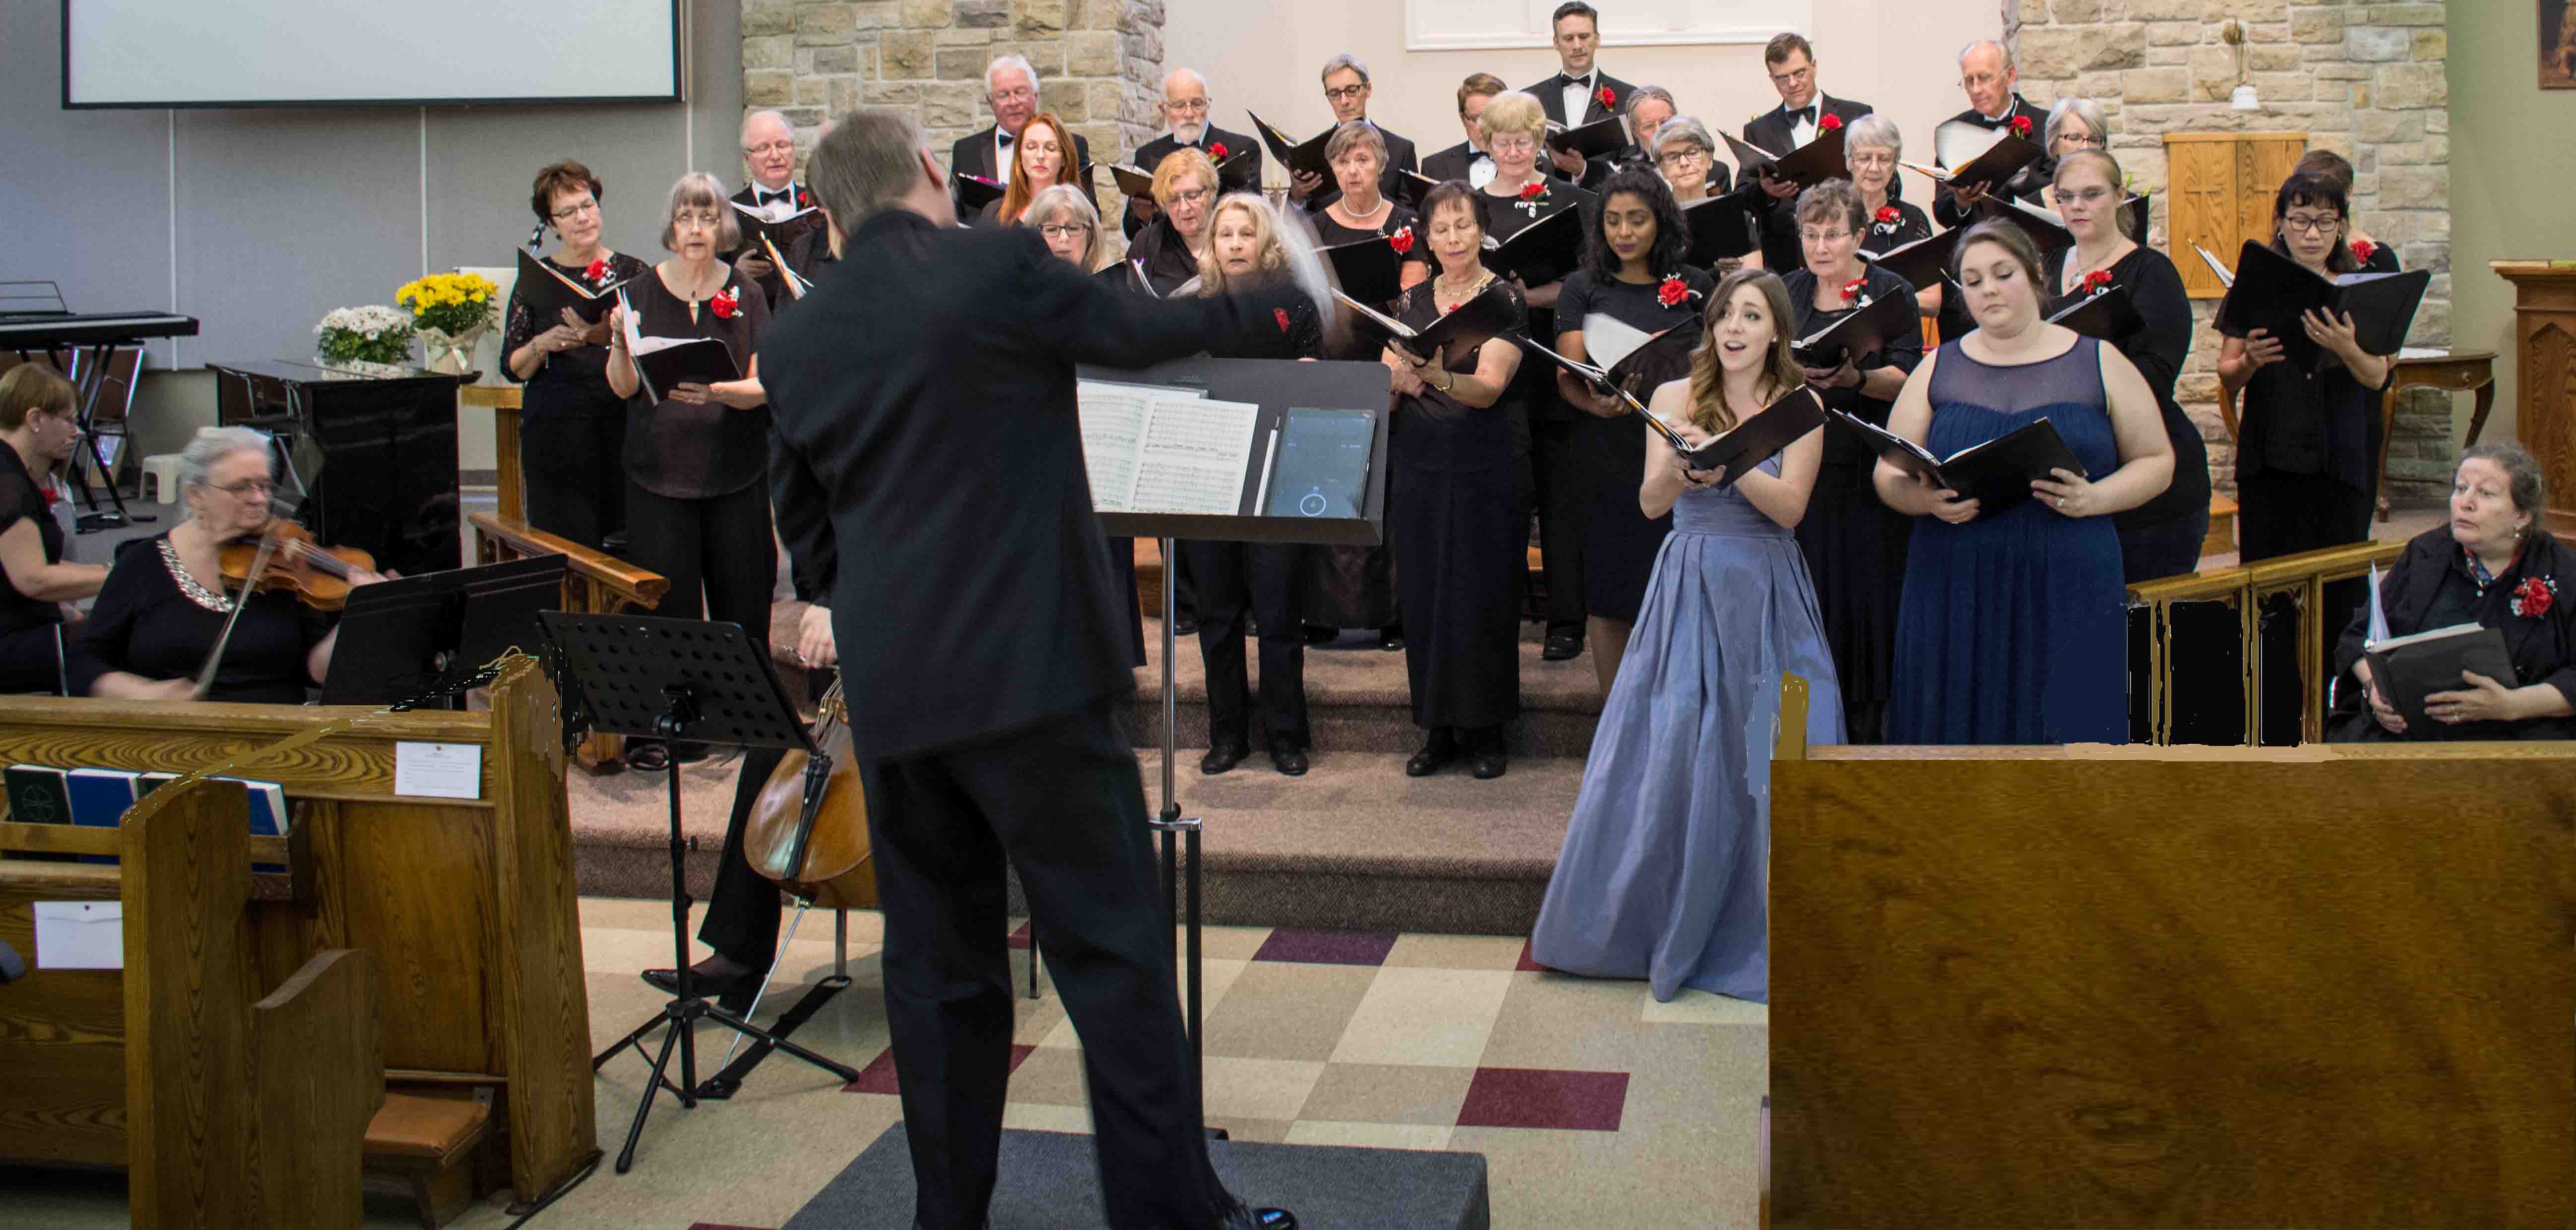 The choir in 2011 photographed by Eric Castro